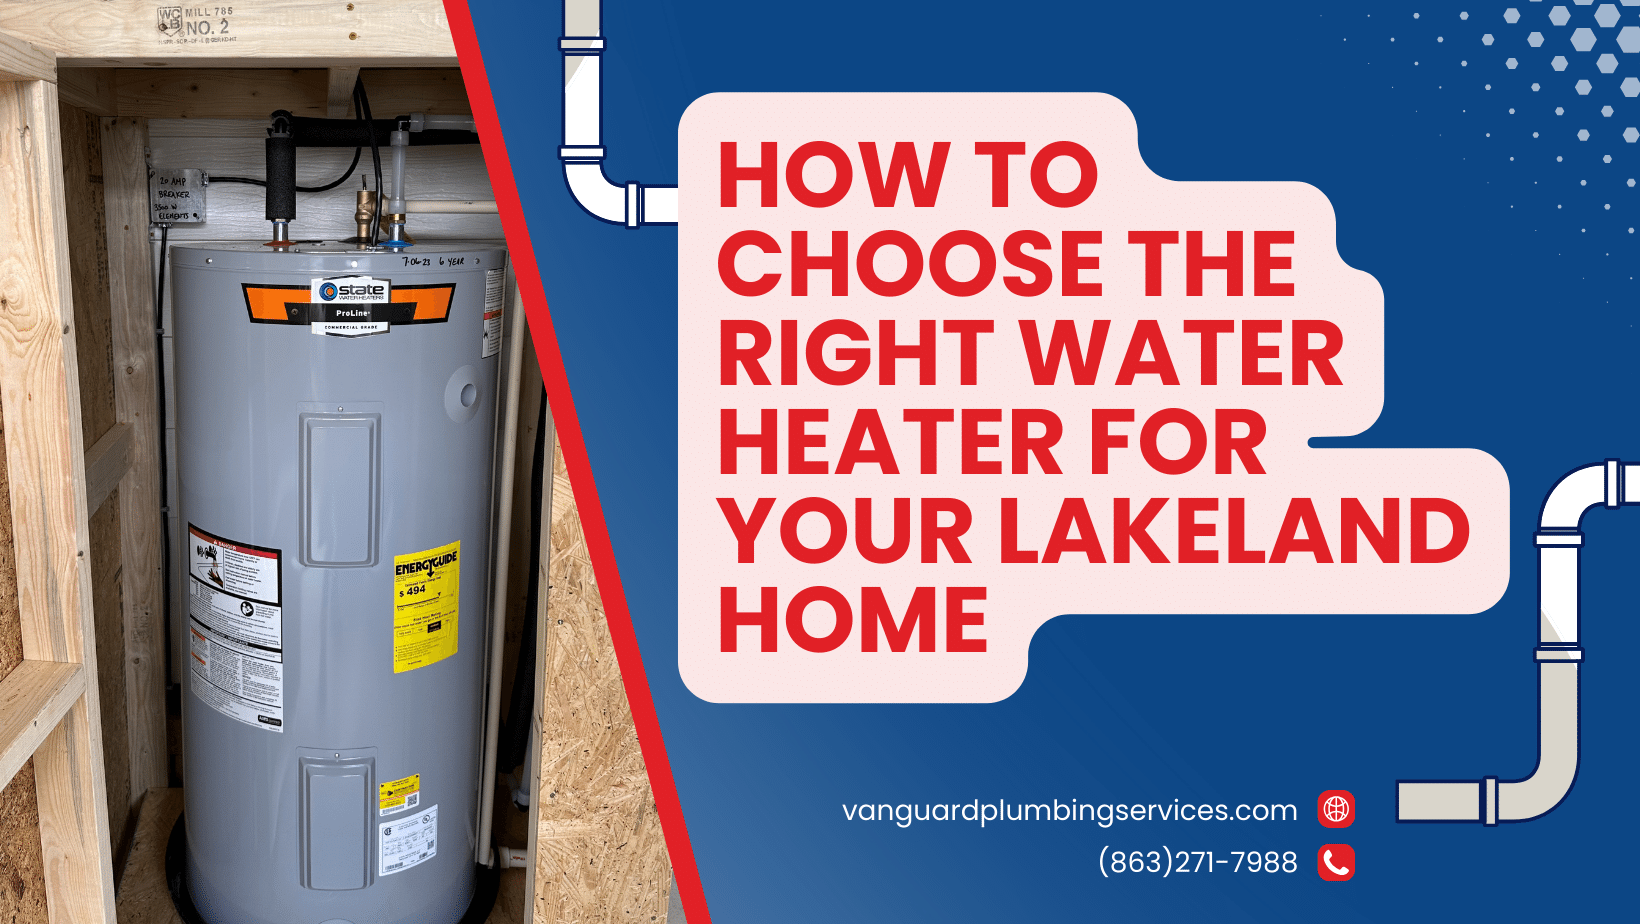 How to Choose the Right Water Heater for Your Lakeland Home